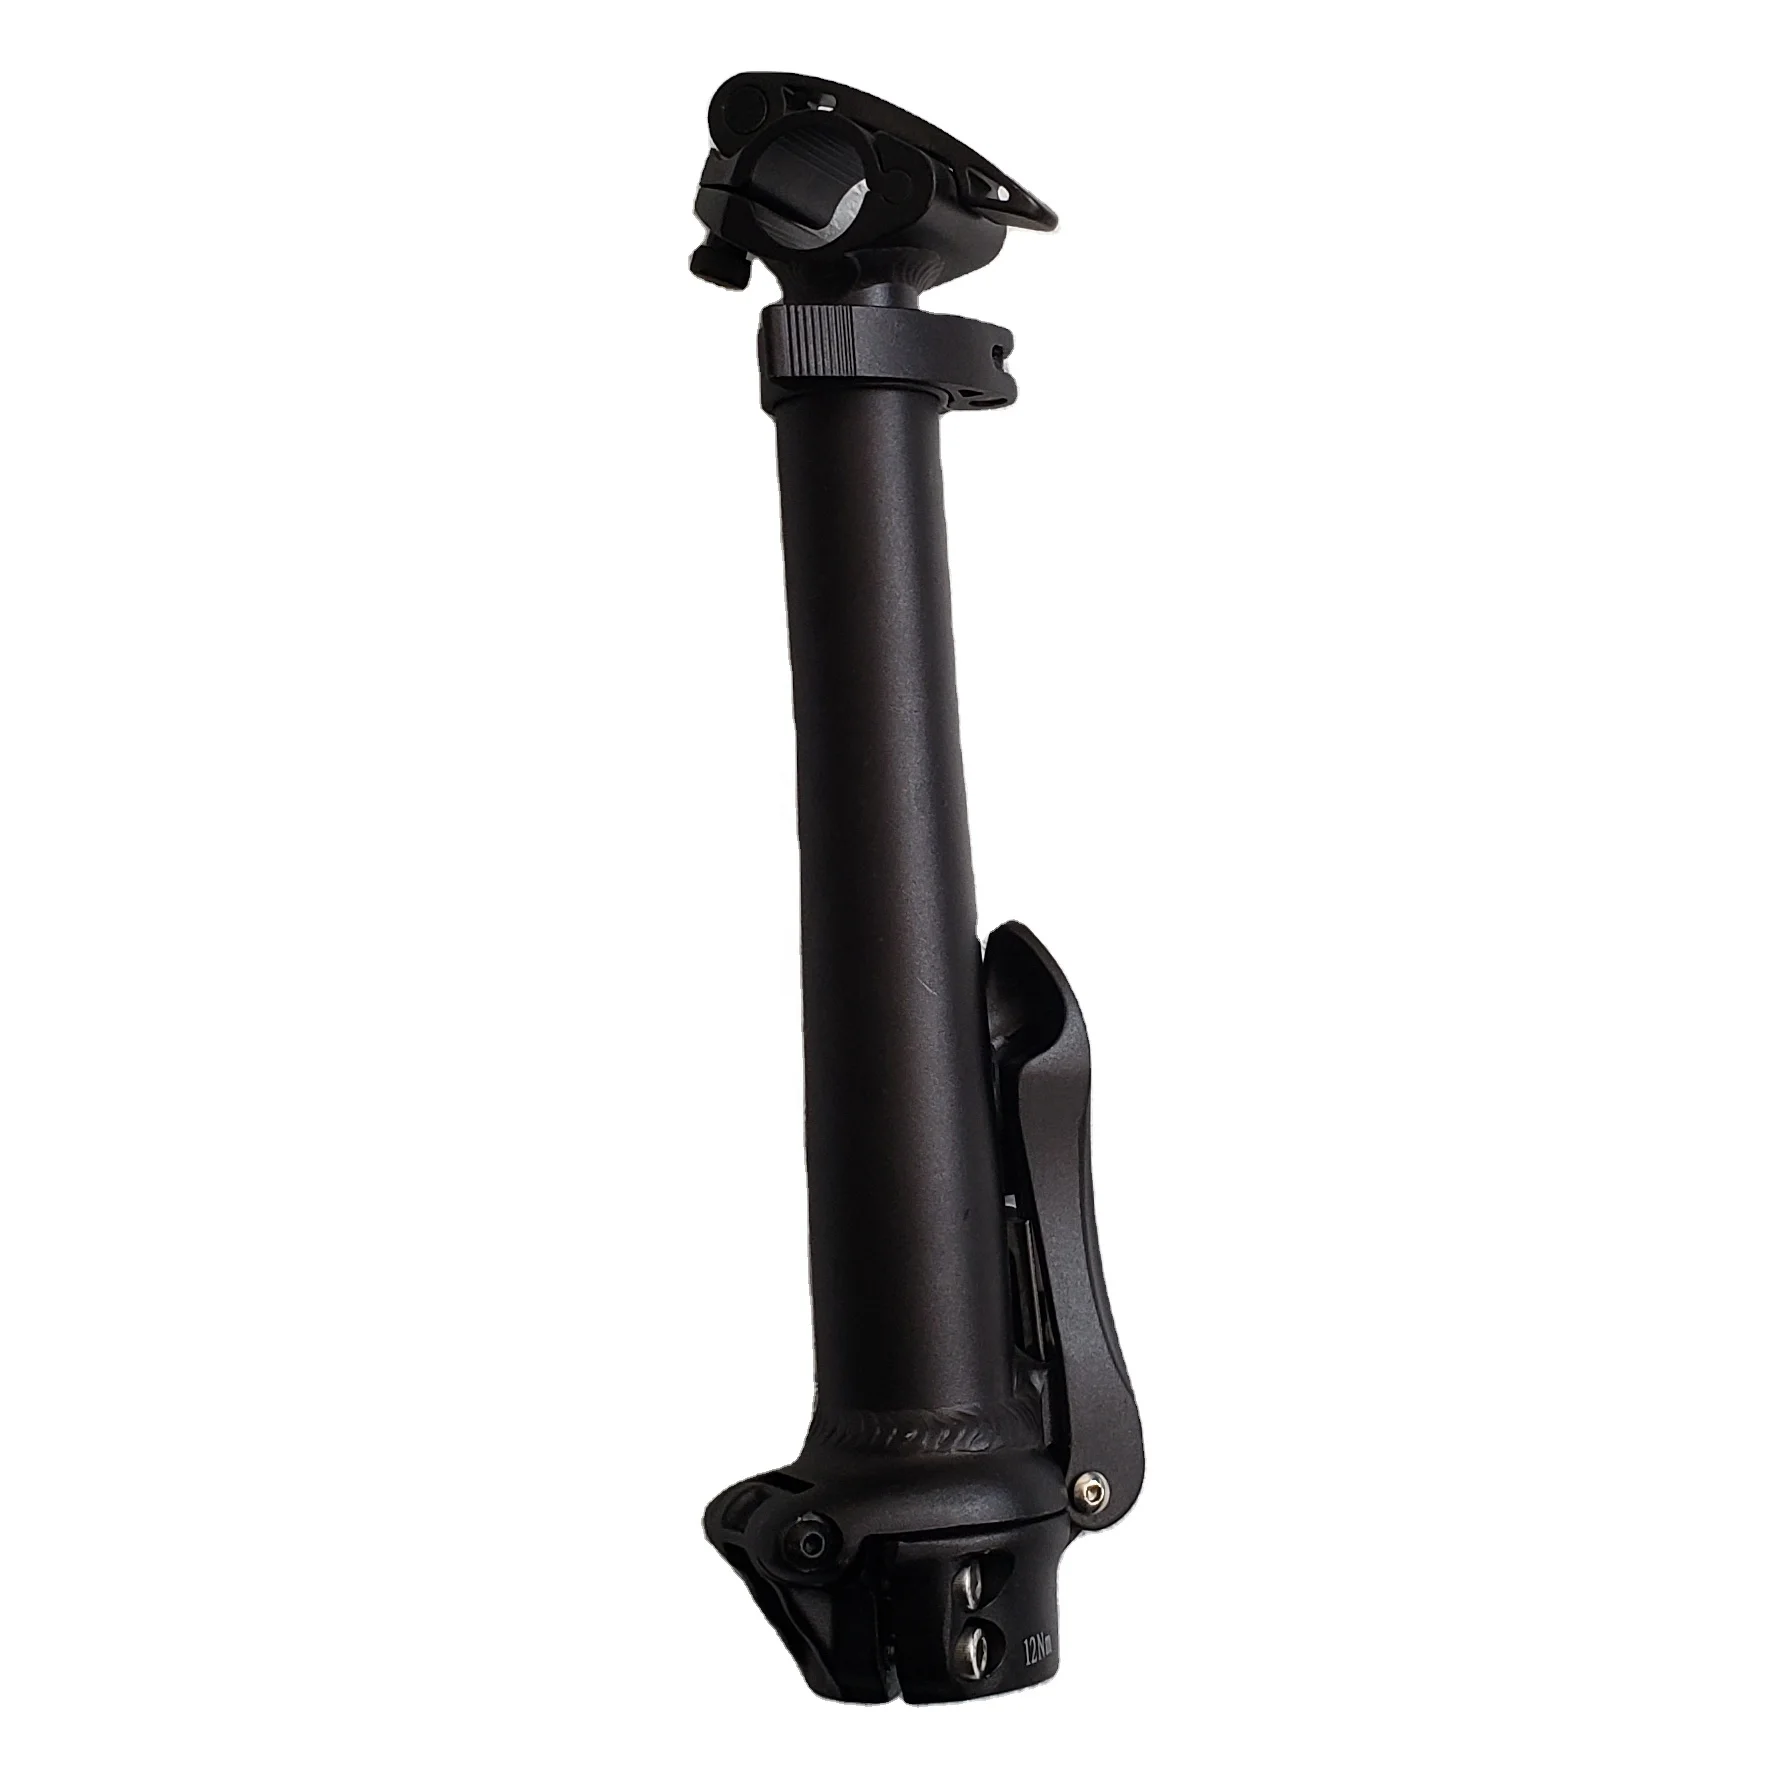 FH05 binodal folding stem high quality and own patent stem the only real FH05 products for folding bikes E BIKES